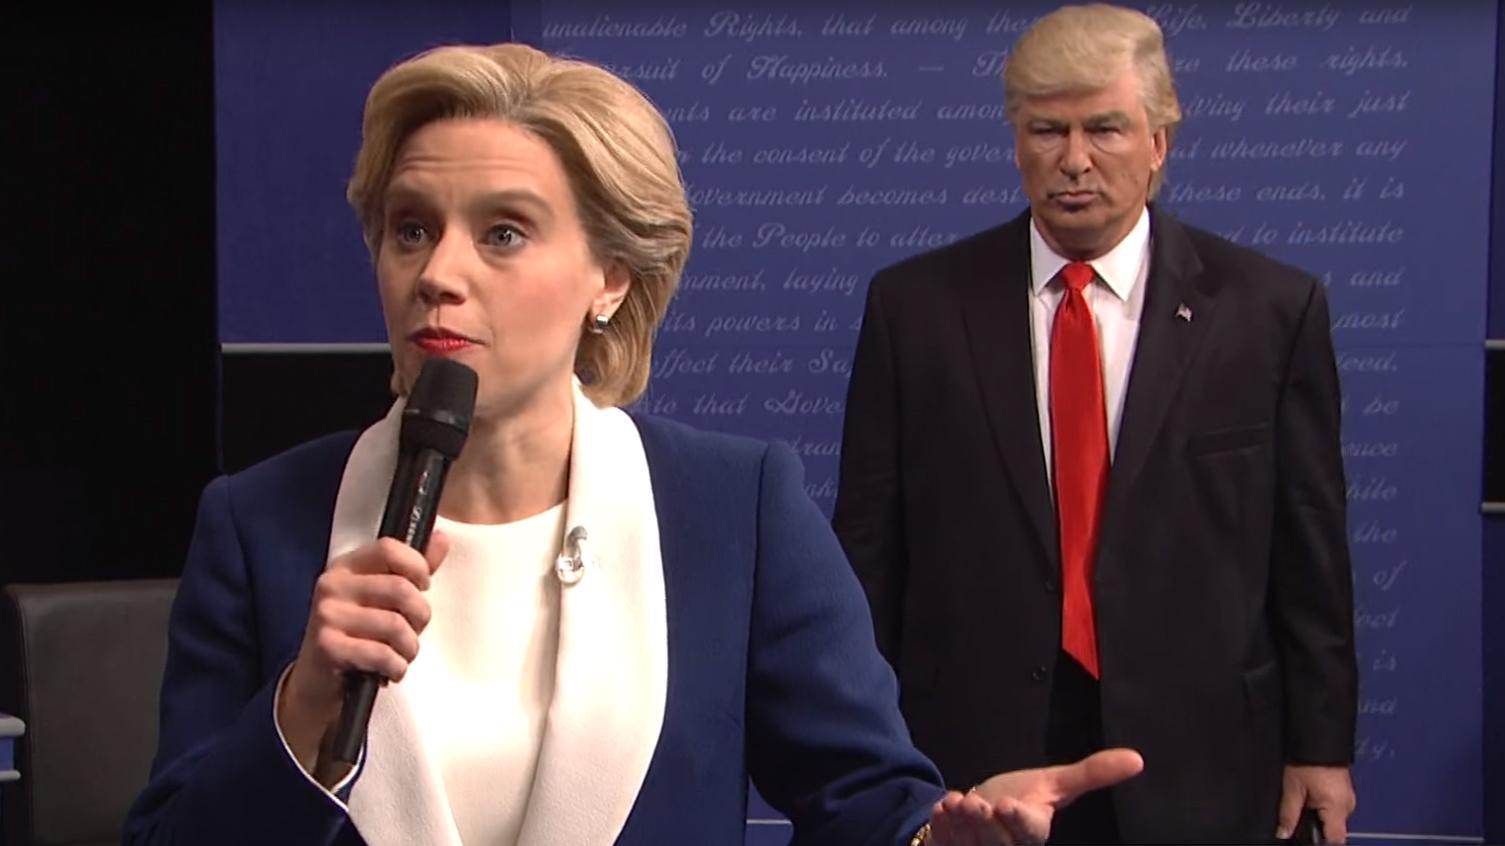 Kate McKinnon as Hilary Clinton and Alec Baldwin as President Trump on US show ‘Saturday Night Live’